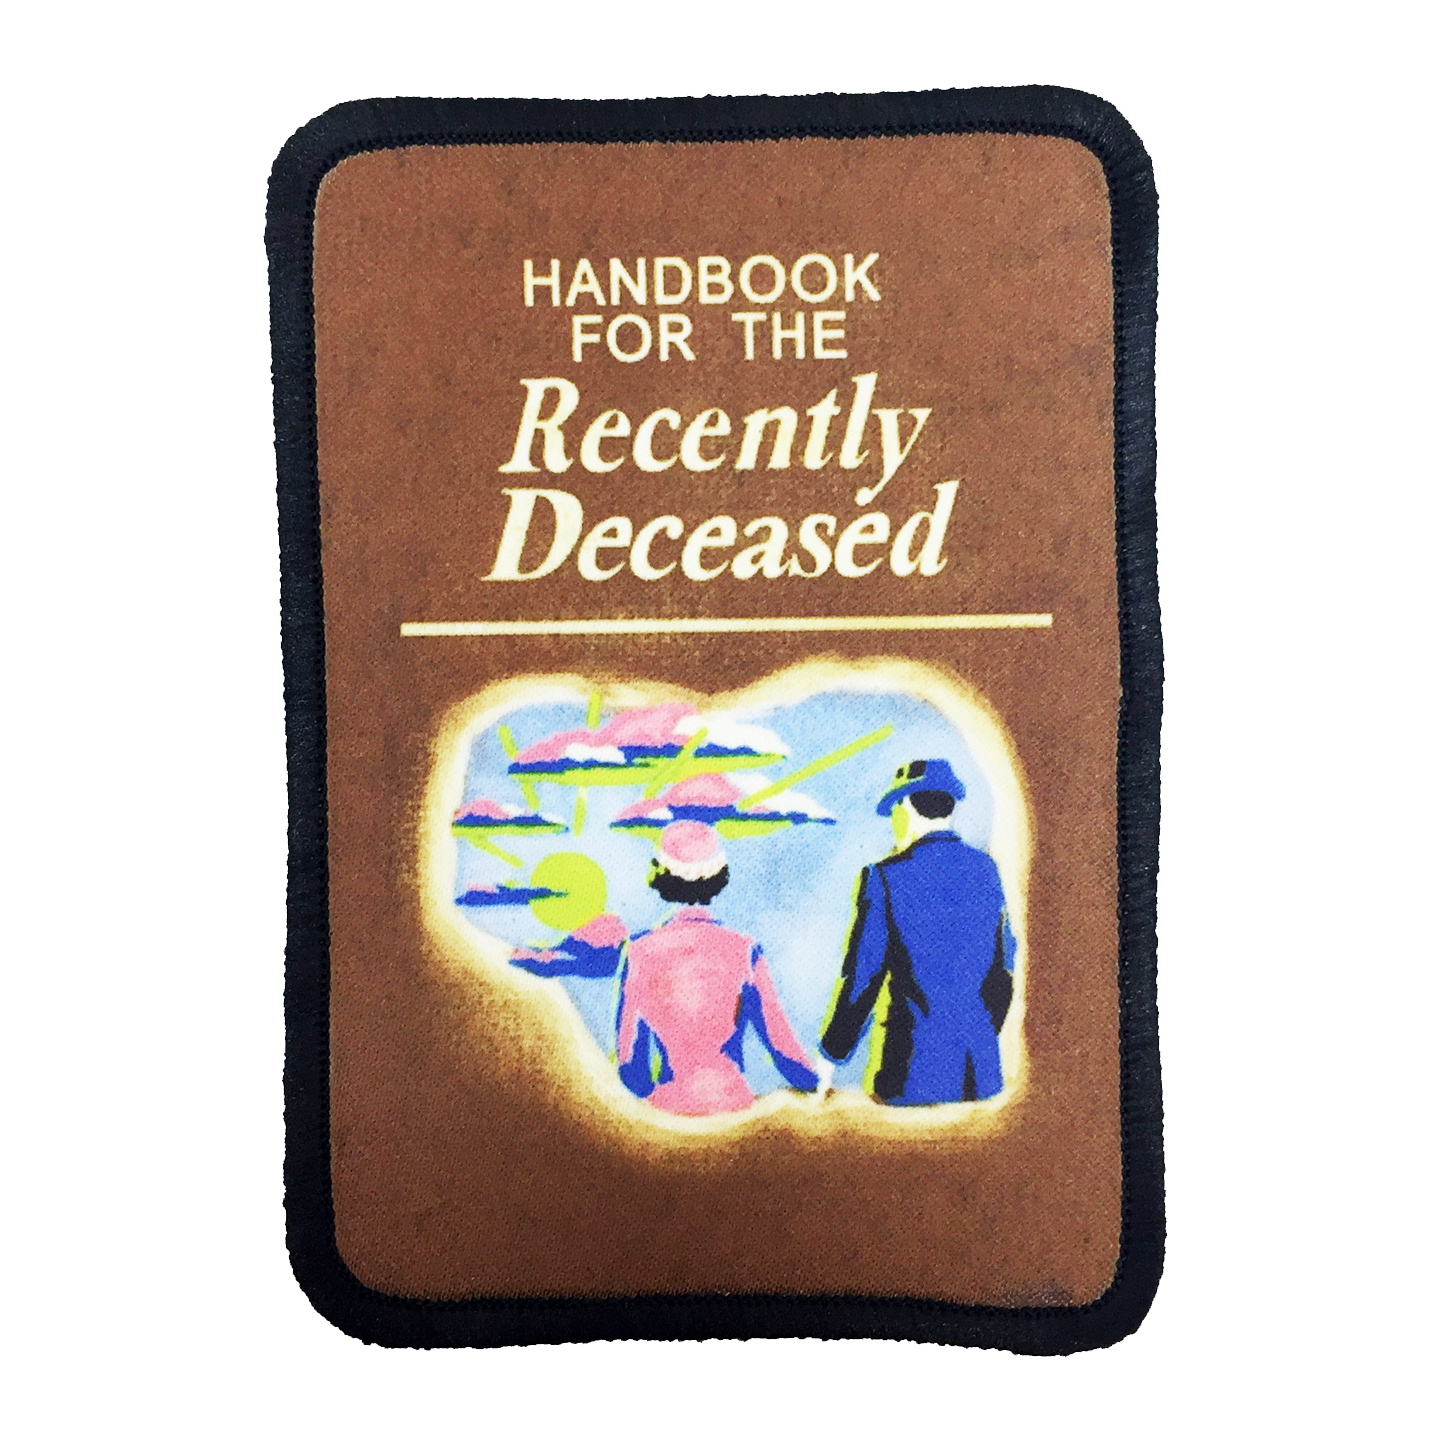 Handbook for the Recently Deceased Iron-On Patch - UNMASKED Horror & Punk Patches and Decor